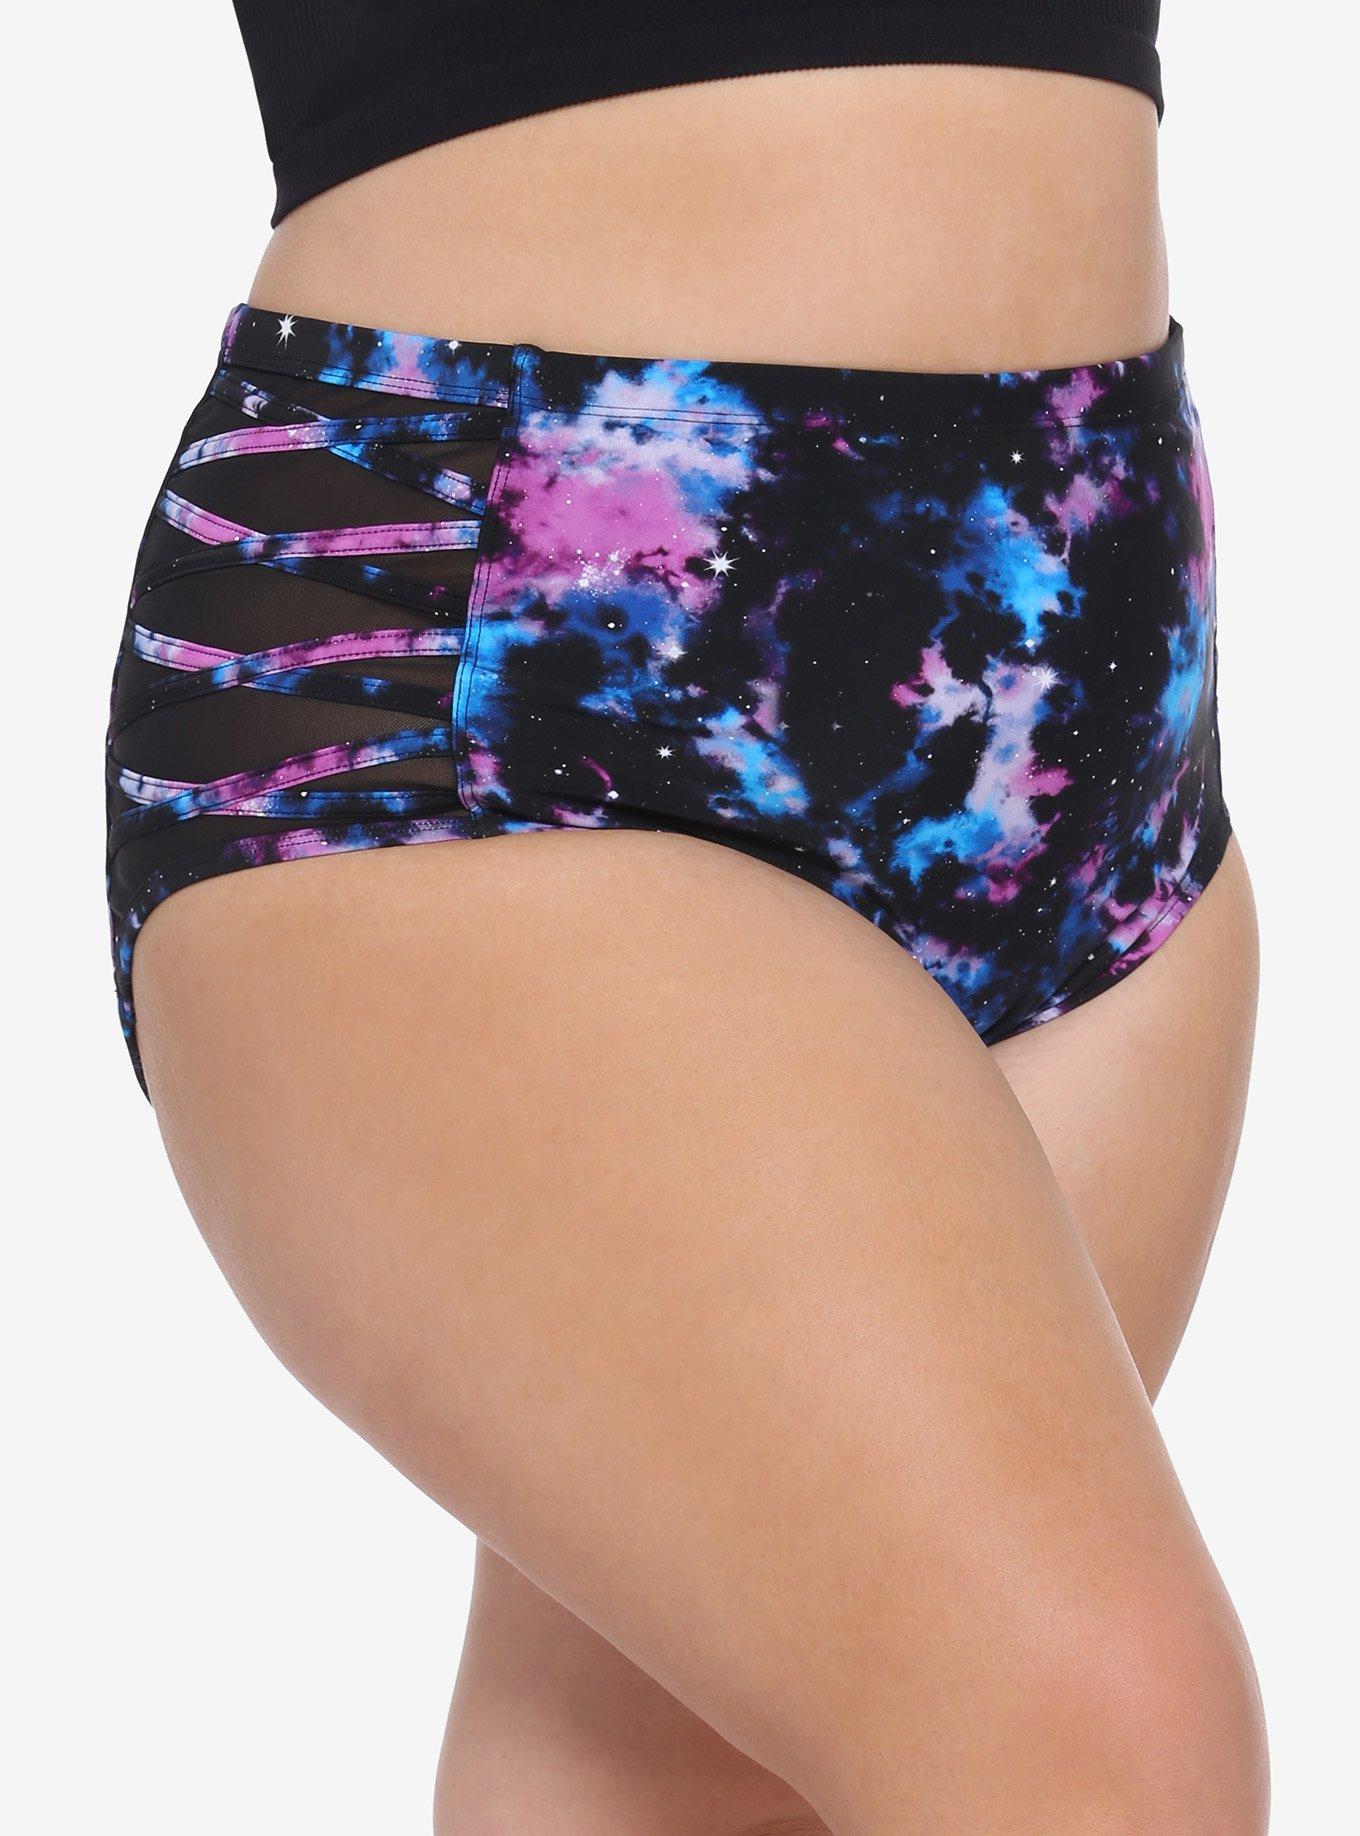 Galaxy Strappy High-Waisted Swim Bottoms Plus Size, MULTI, hi-res